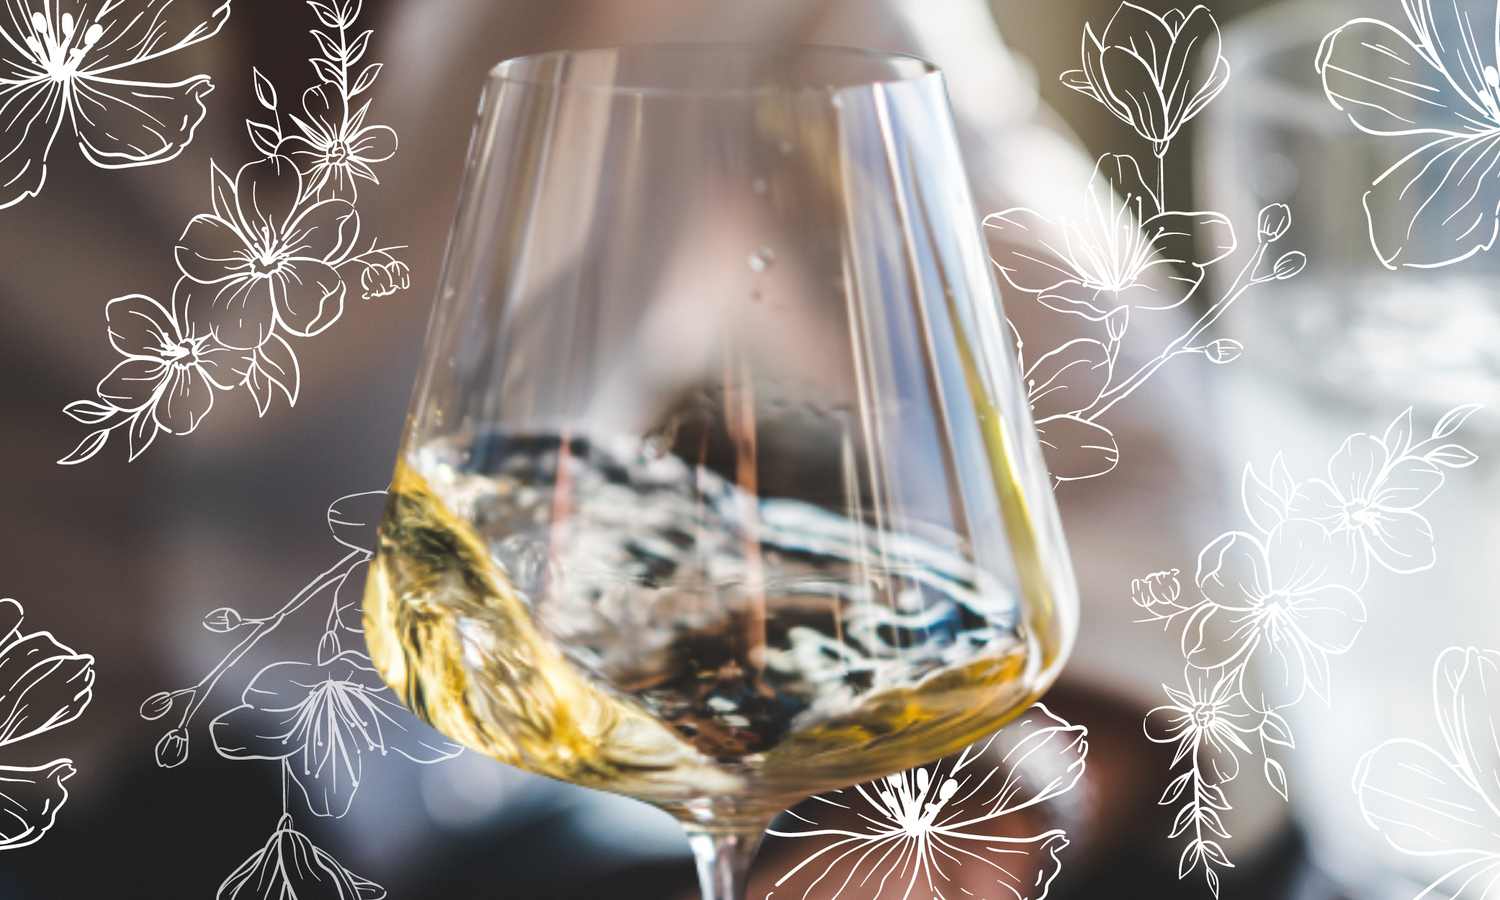 Wine 101: Why Do Wines Smell Like Flowers?